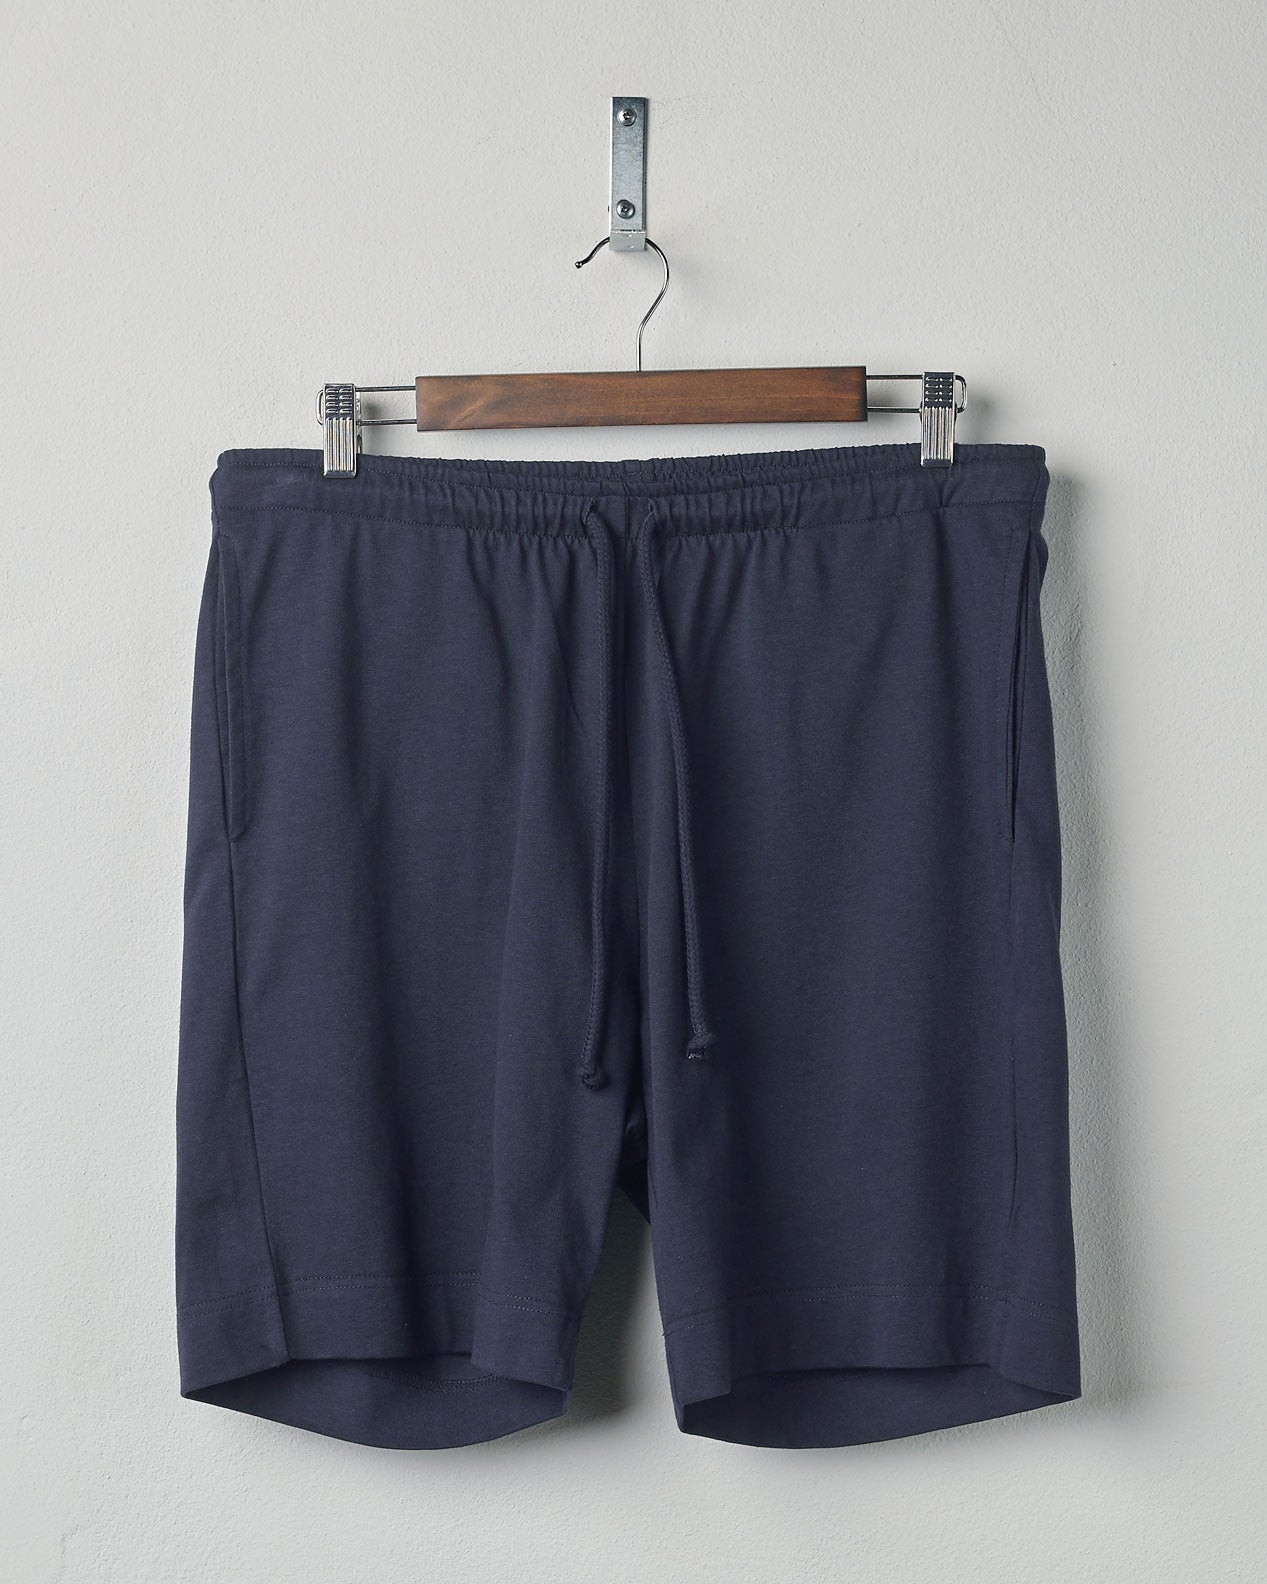 Front view of midnight blue organic cotton #7007 jersey shorts by Uskees, presented on hanger against white background. Clear view of drawstring waist and side pockets.